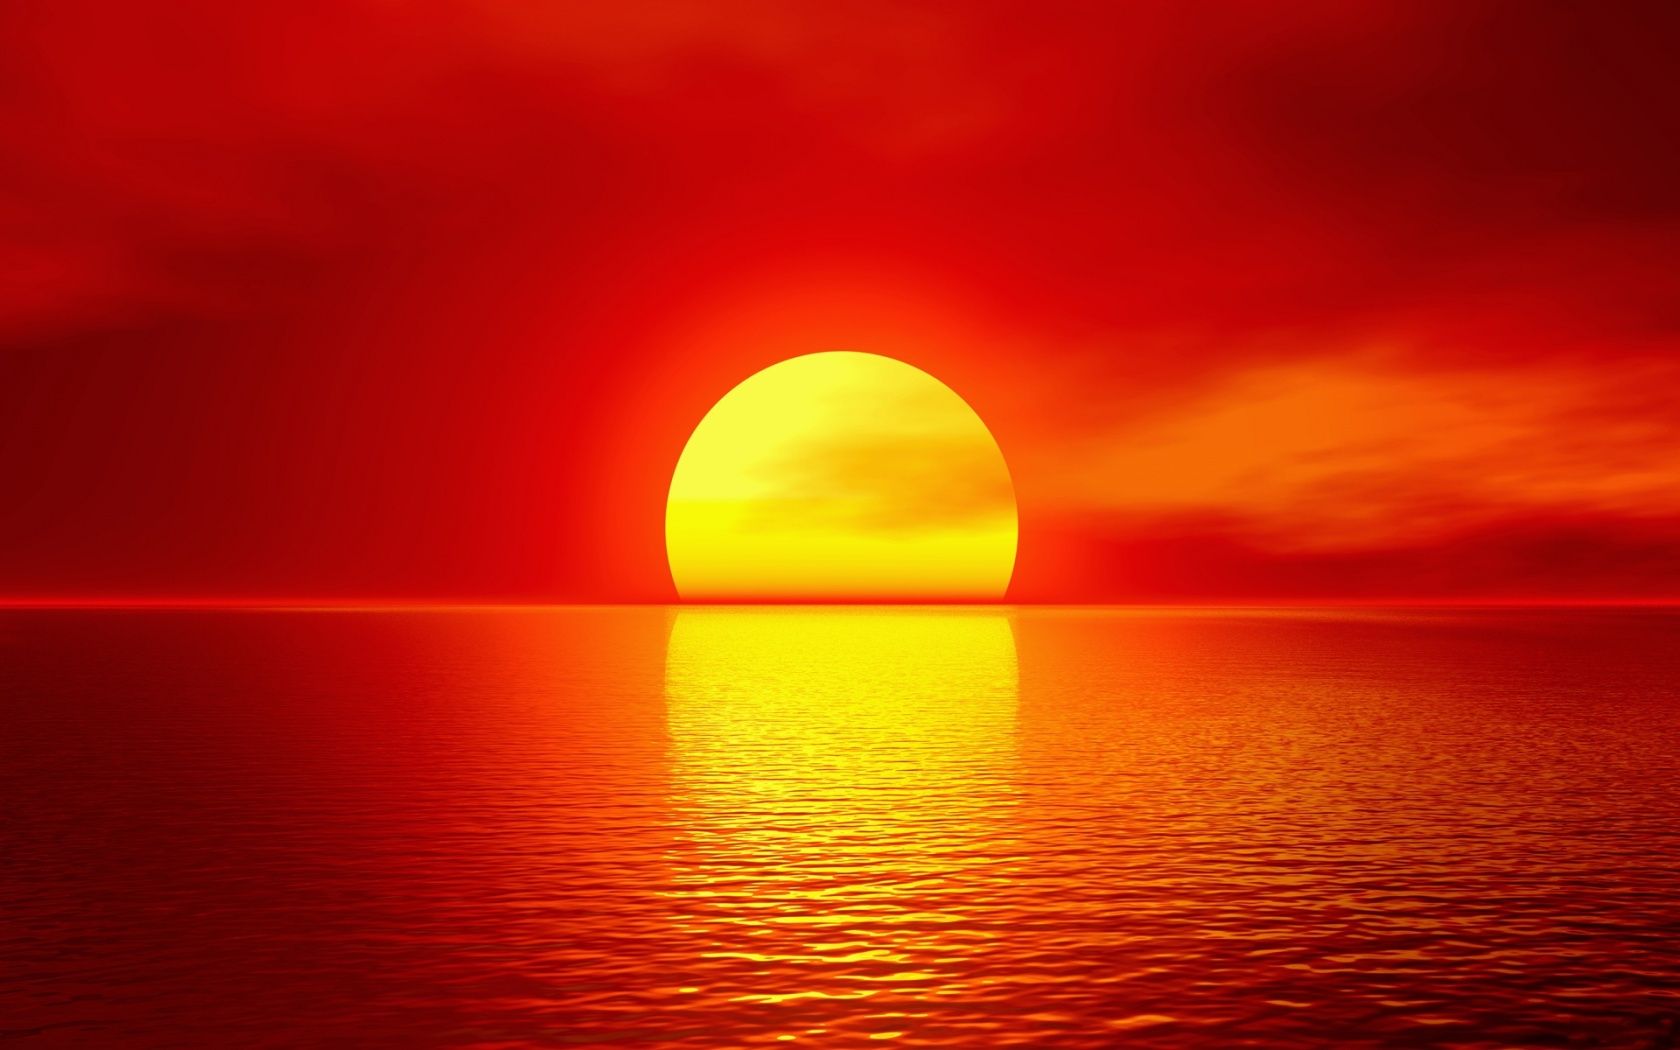 Sun Images 1680x1050 beauty of red sun Wallpaper and stock